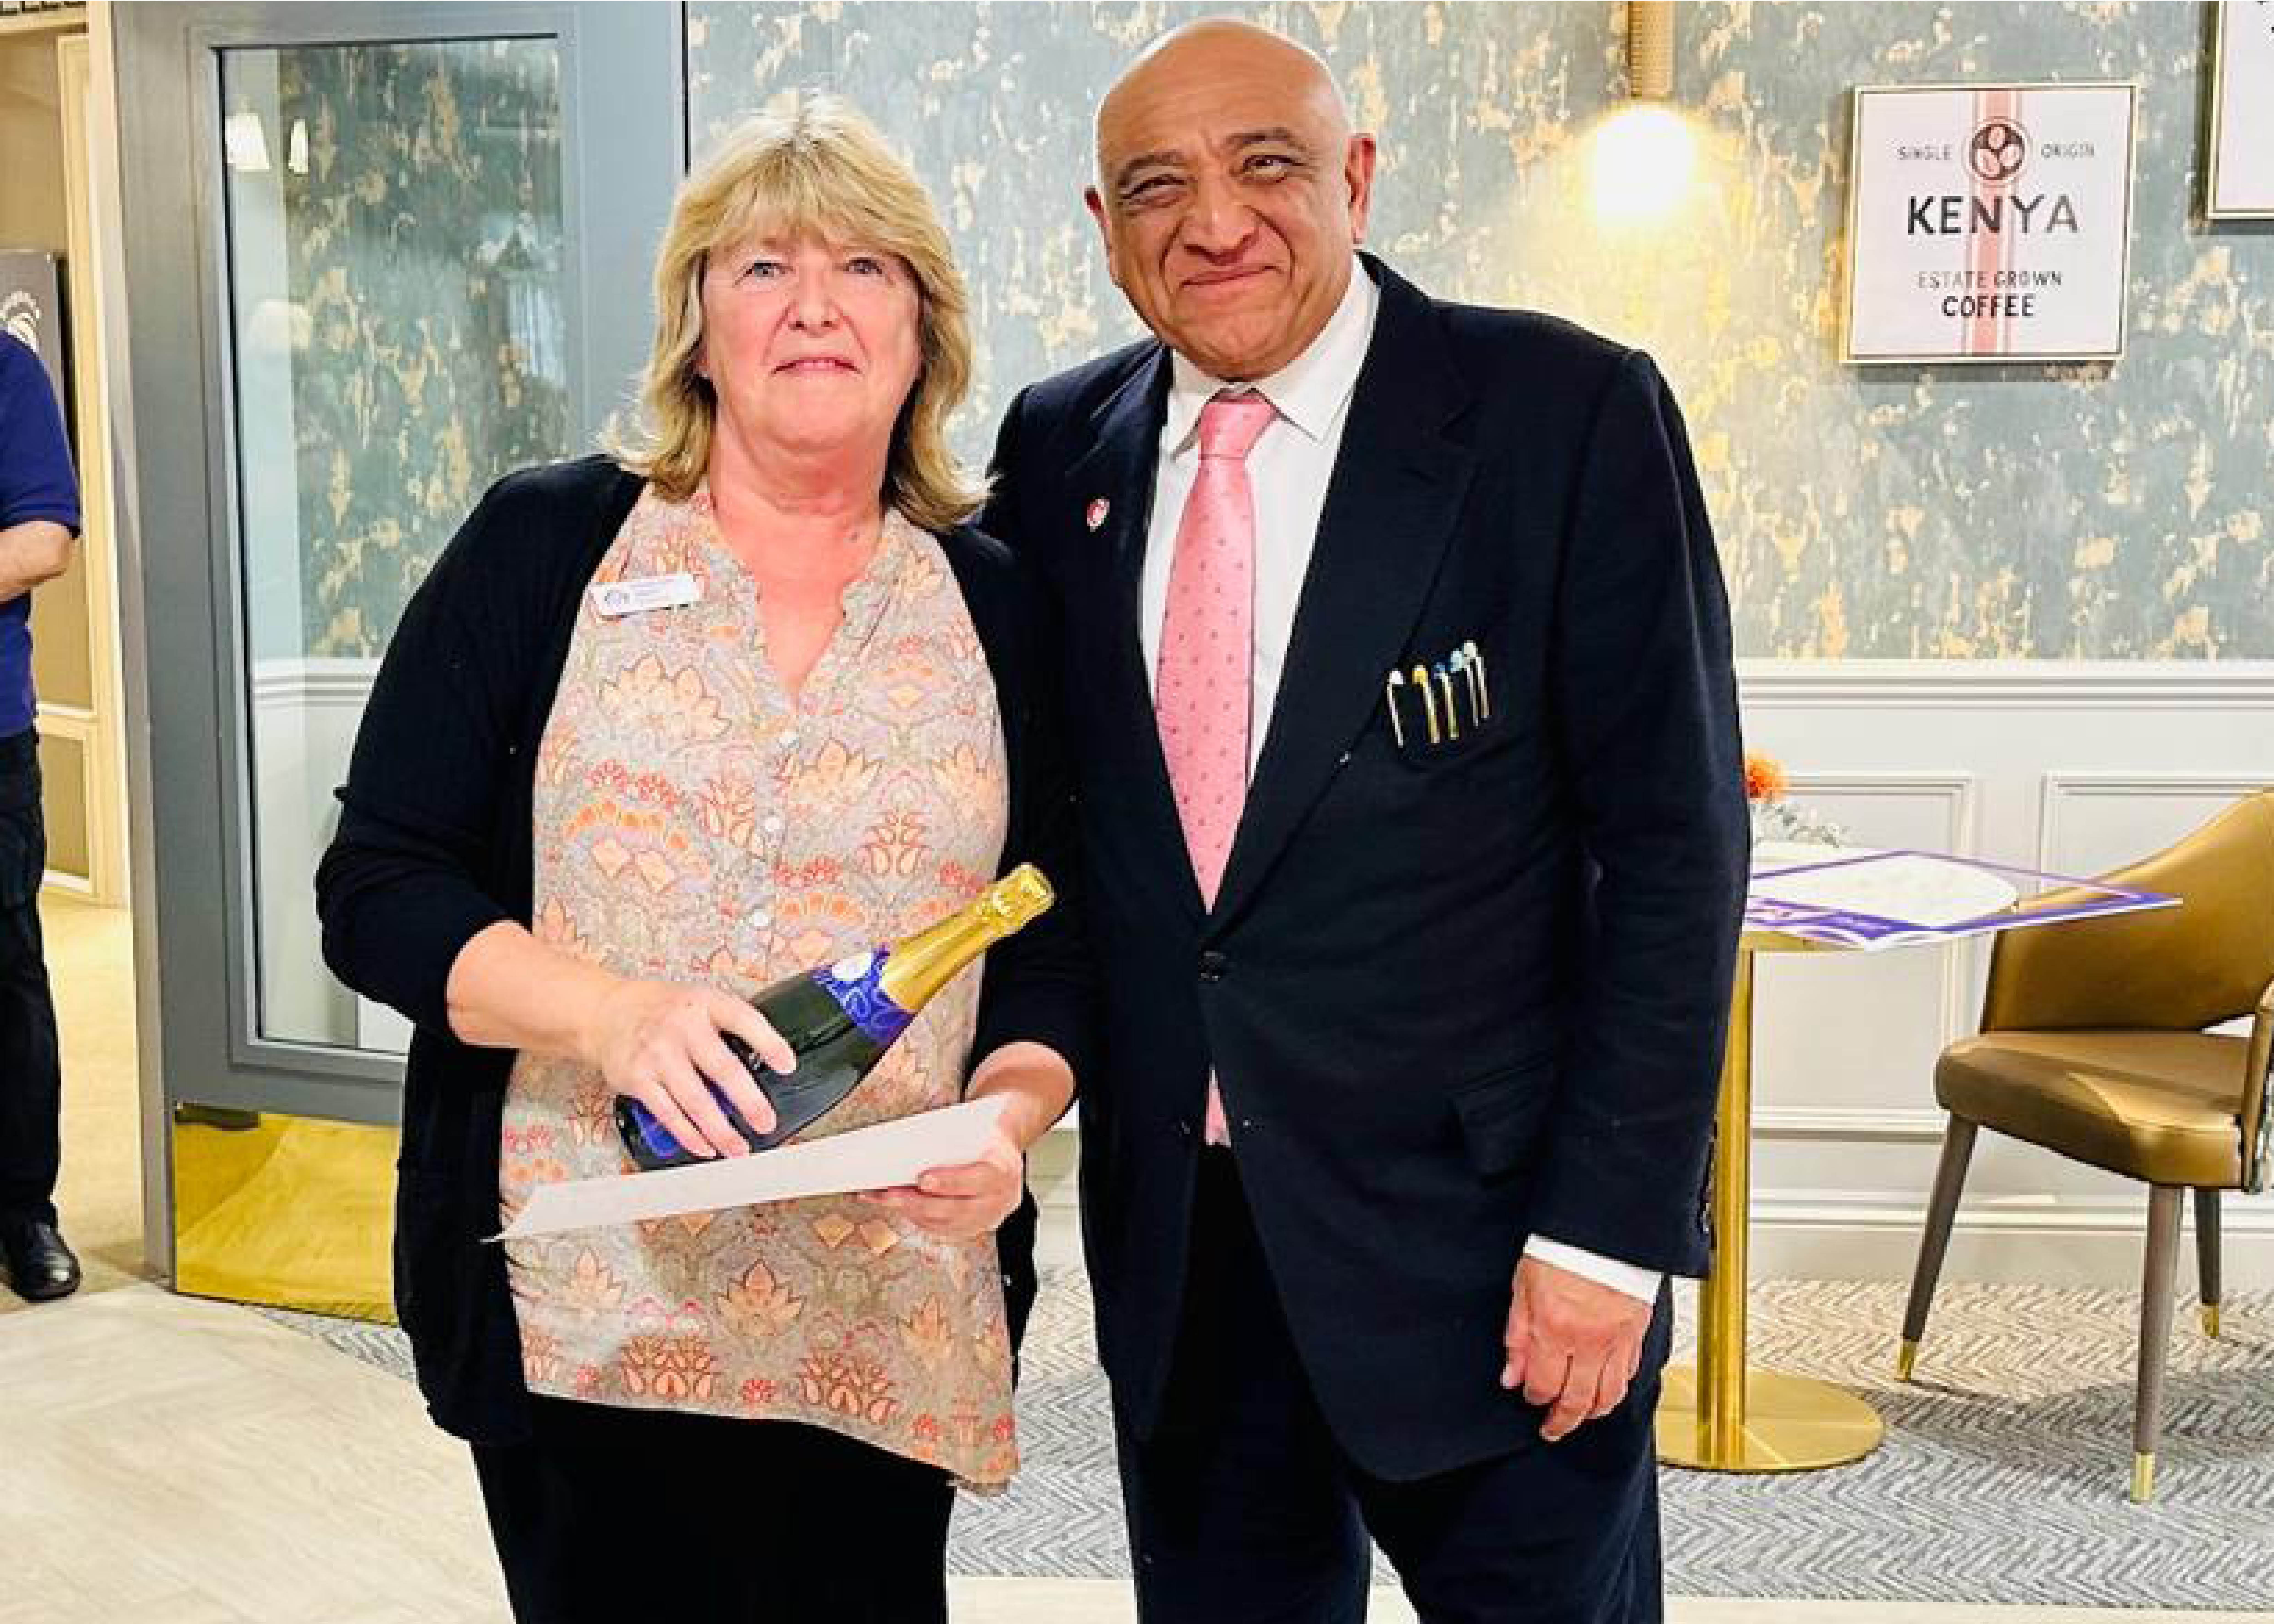 Employee of the month awarded to Receptionist Tracey Reed by Chairman Abdul Kachra